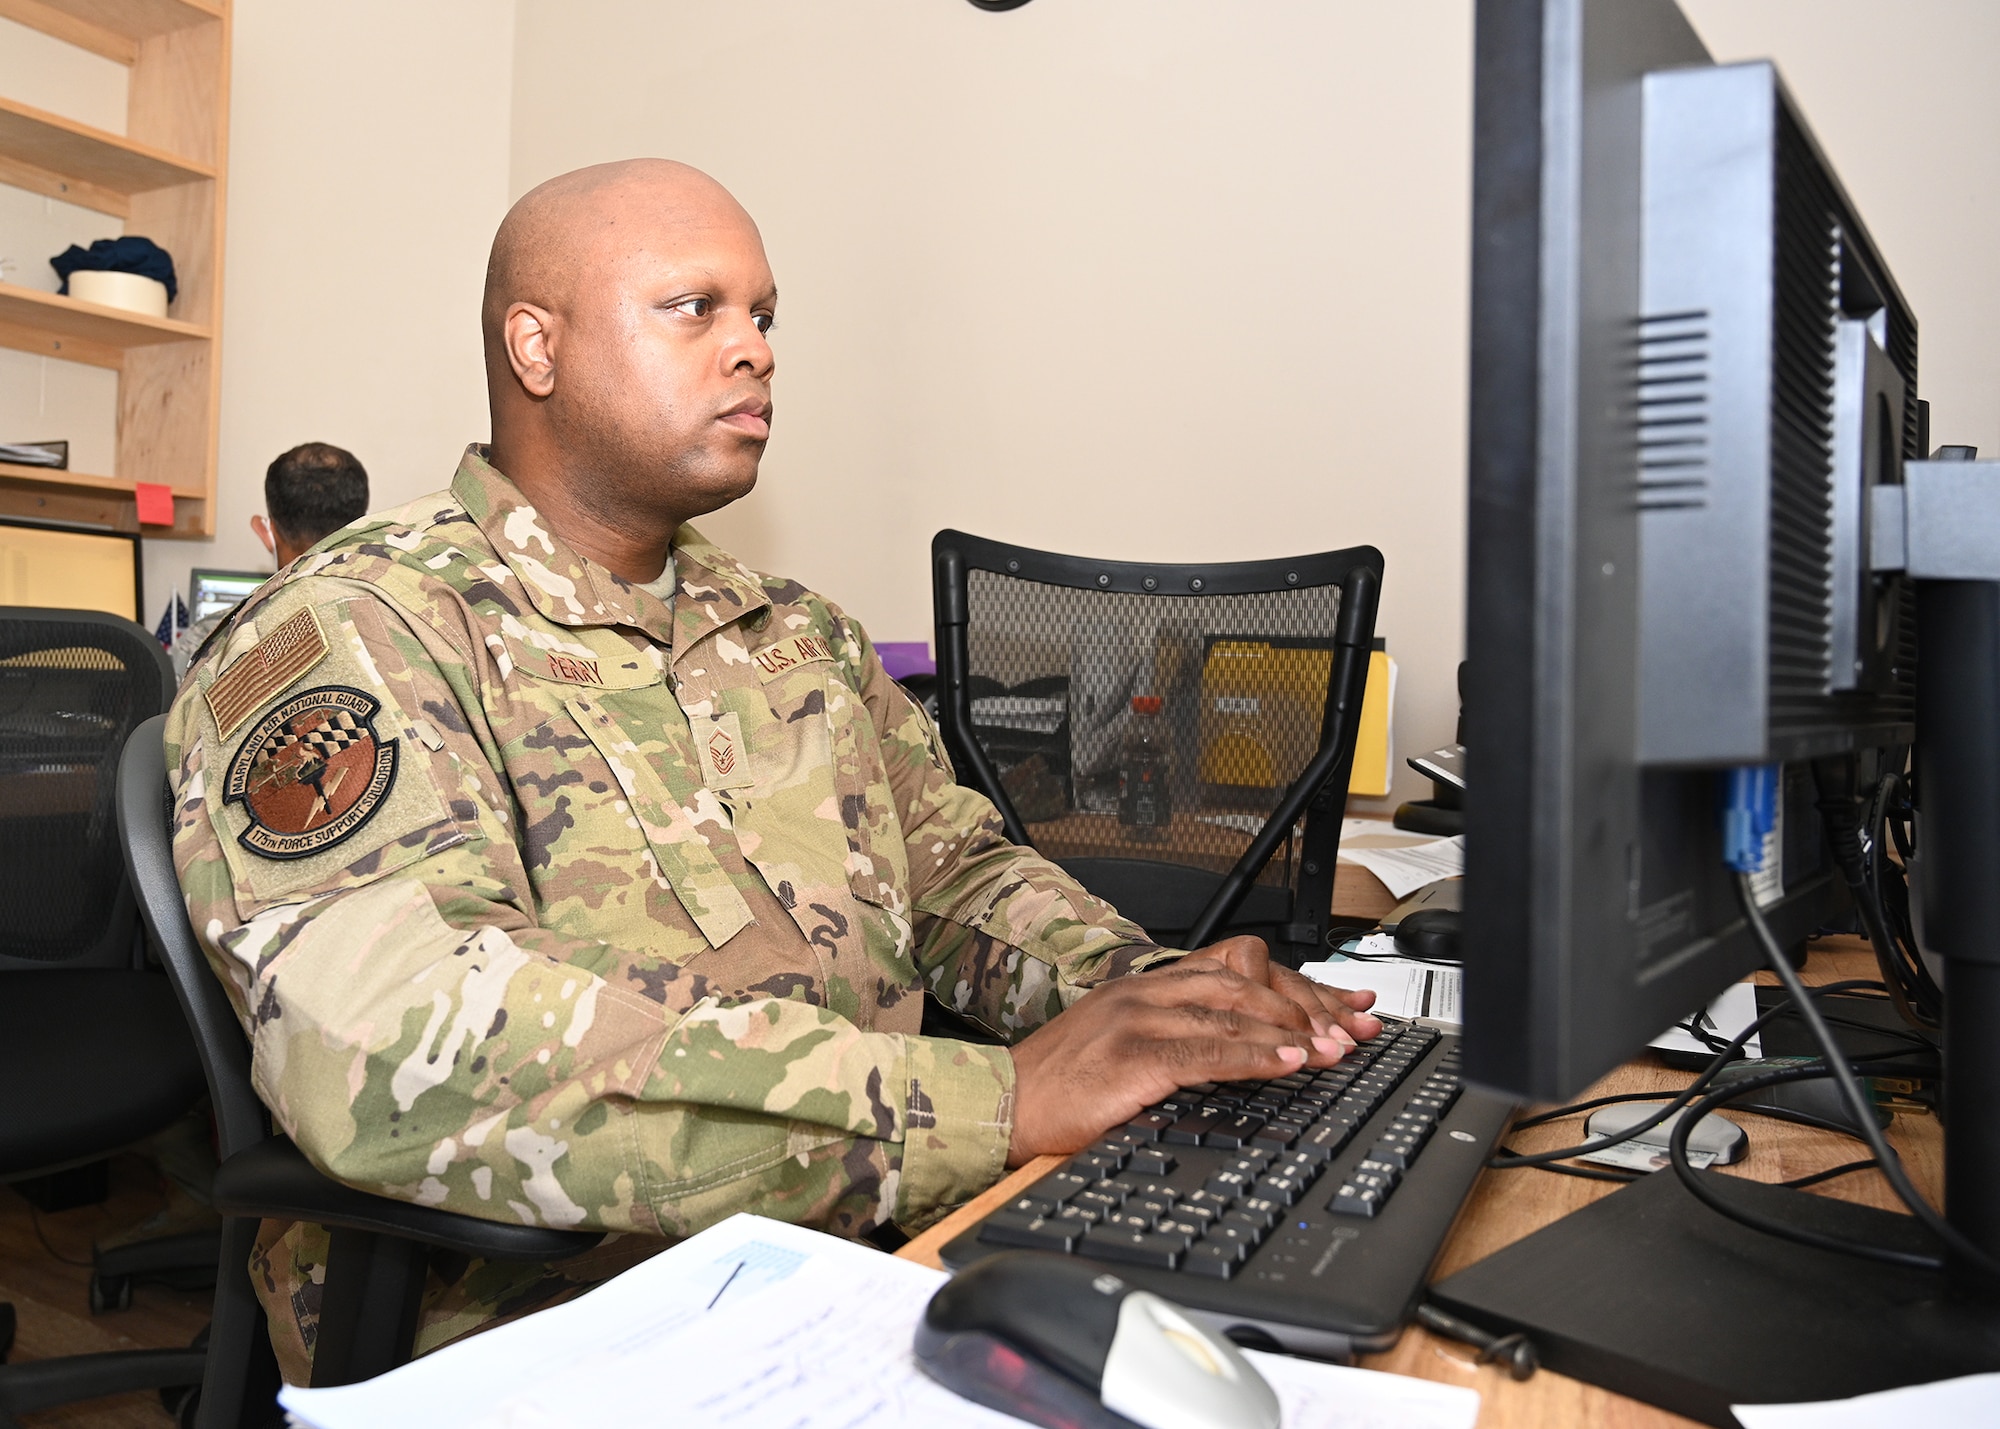 Master Sgt. Robert Perry, 175th Force Support Squadron training manager, works at his computer during a regularly scheduled drill at Warfield Air National Guard Base at Martin State Airport, Sep. 13 2020.